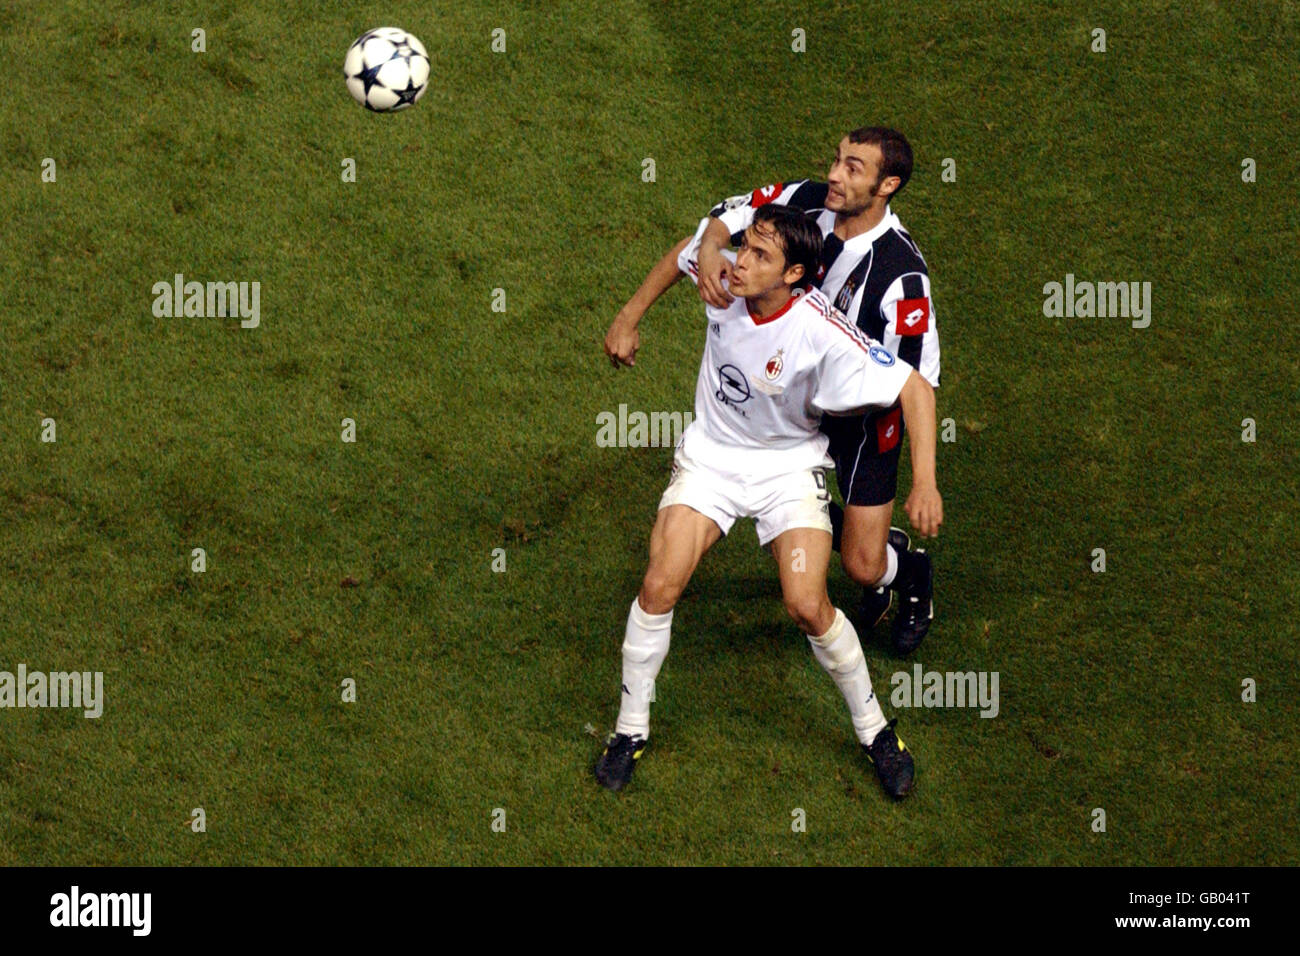 Soccer - UEFA Champions League - Final - Juventus v AC Milan. AC Milan's Filippo Inzaghi (l) shields the ball from Juventus' Paolo Montero Stock Photo